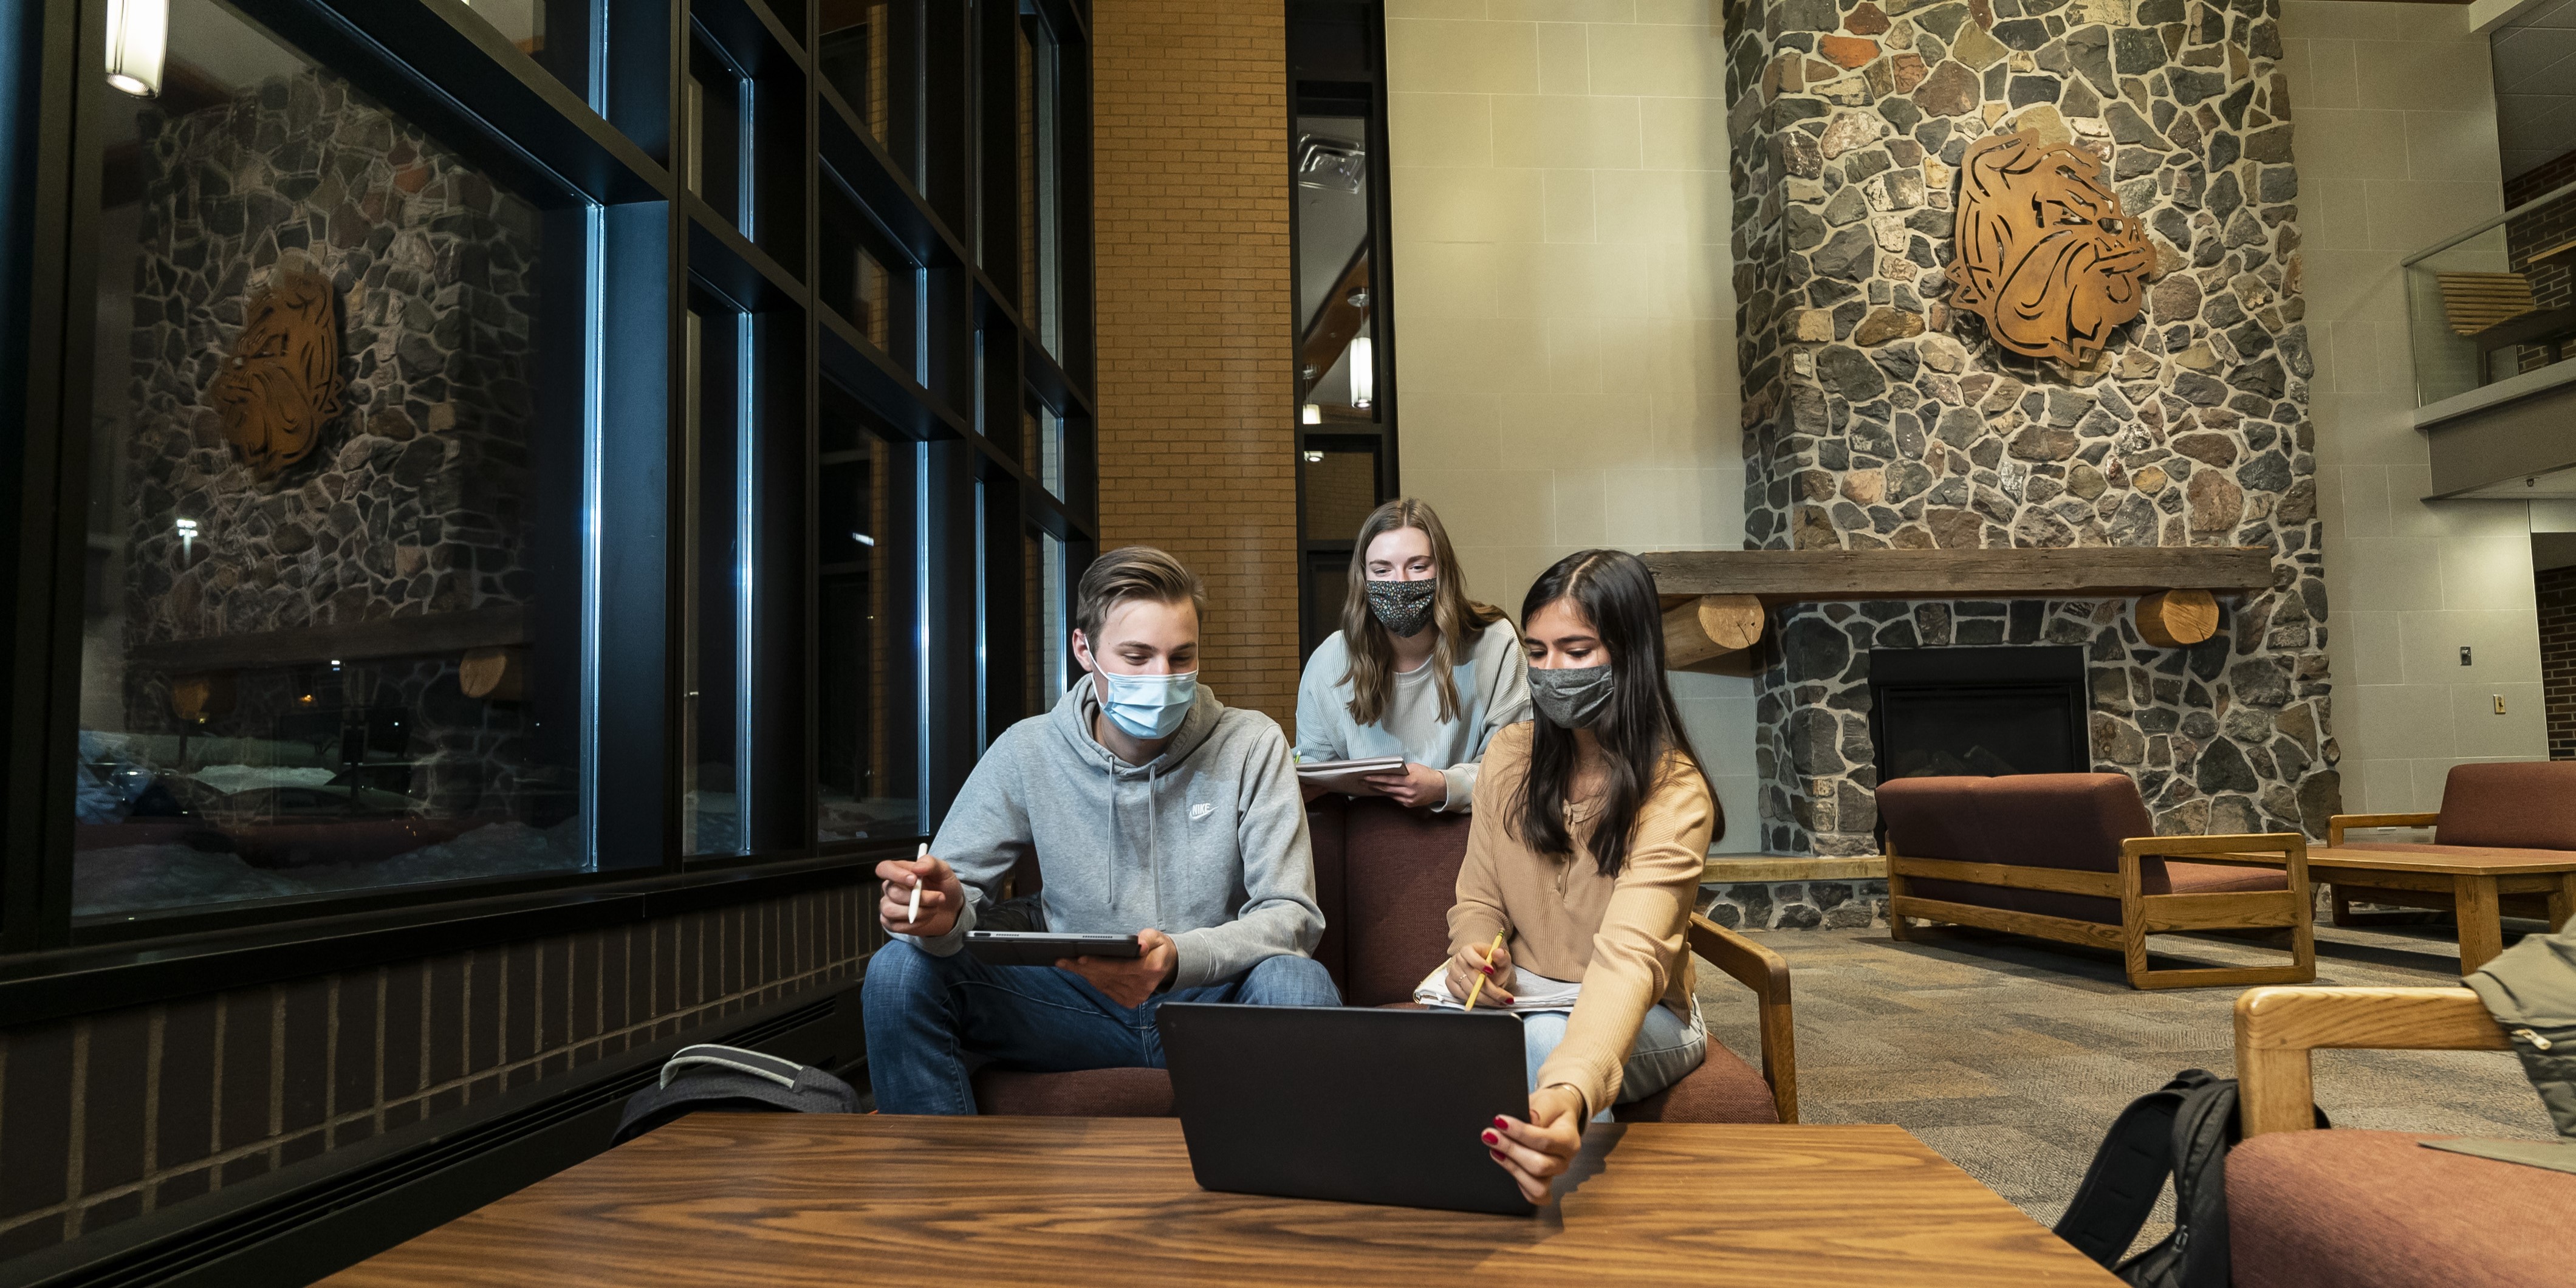 Three students, all wearing masks, study together with a laptop, tablet, and notebook